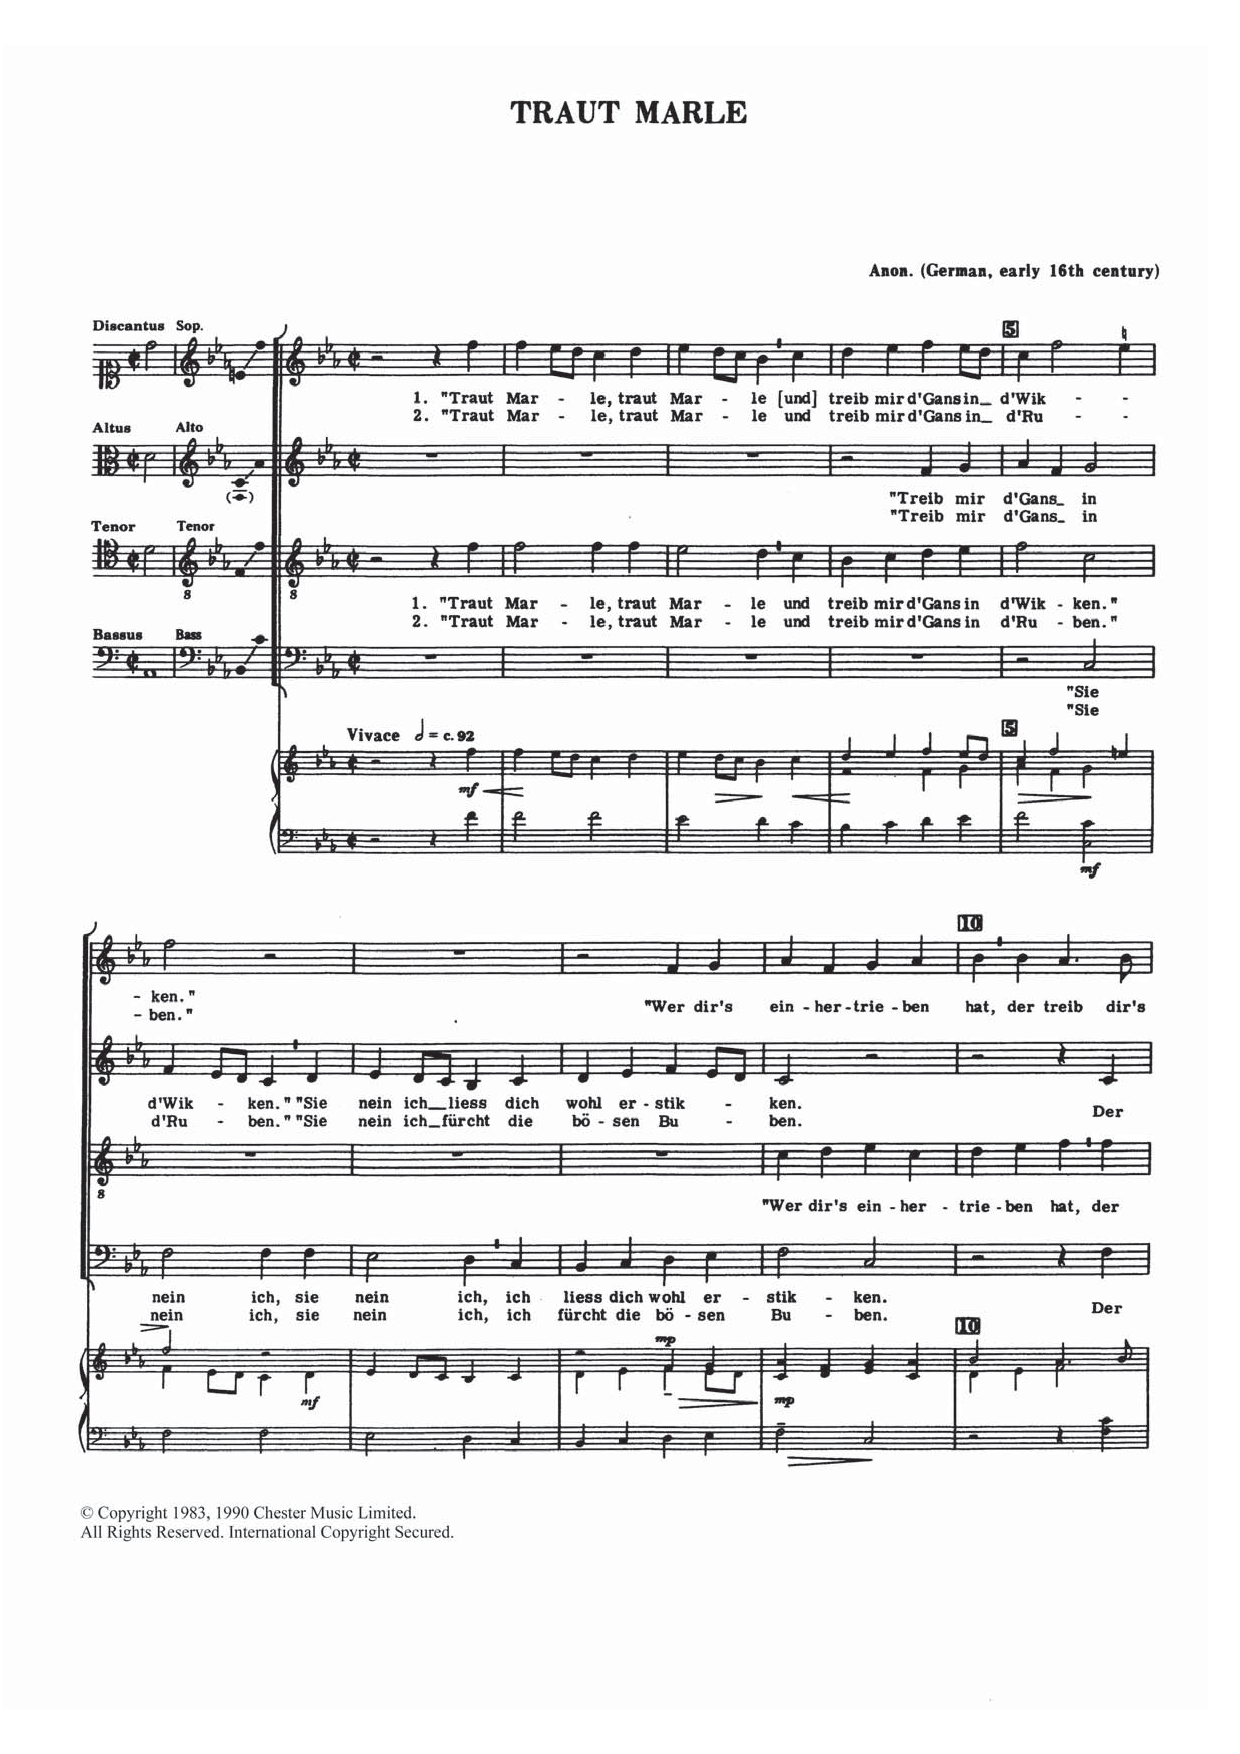 Download Traditional Traut Marle Sheet Music